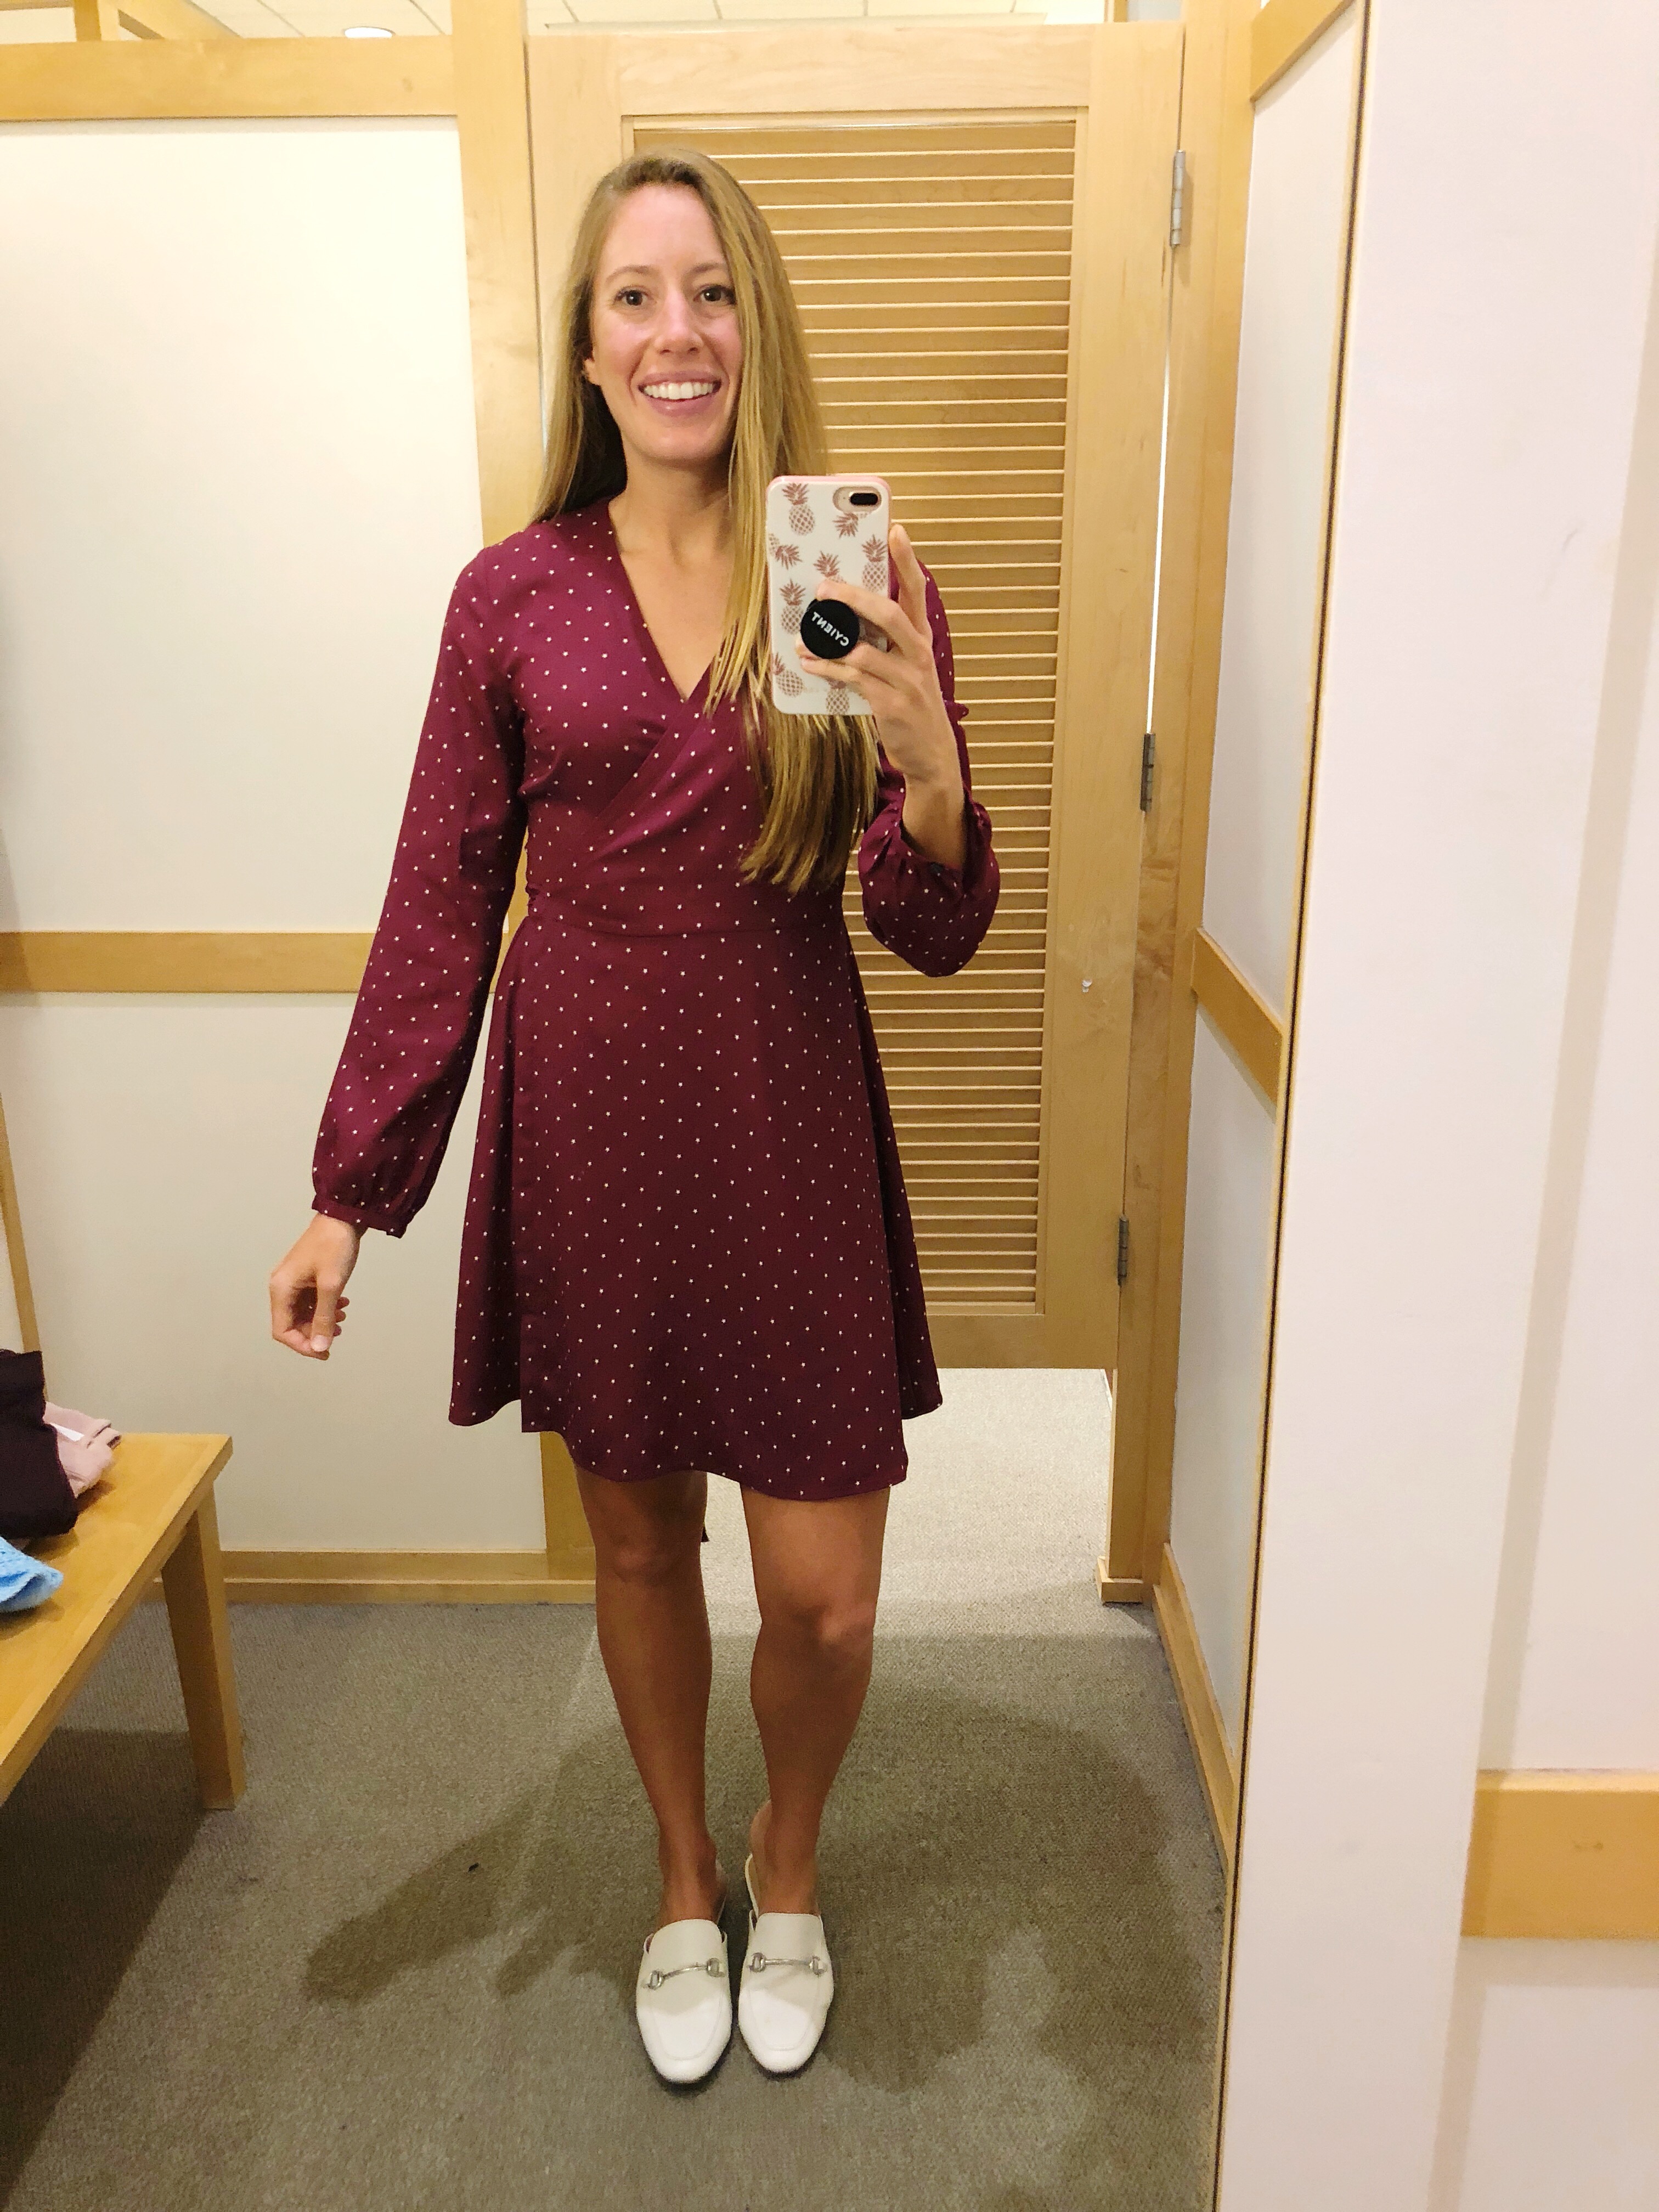 LOFT Fall Try-On Session | Early Fall Outfit Ideas | Fall Fashion | Fall Style | Dresses to Wear for Fall | Essential Fall Wardrobe - Sunshine Style